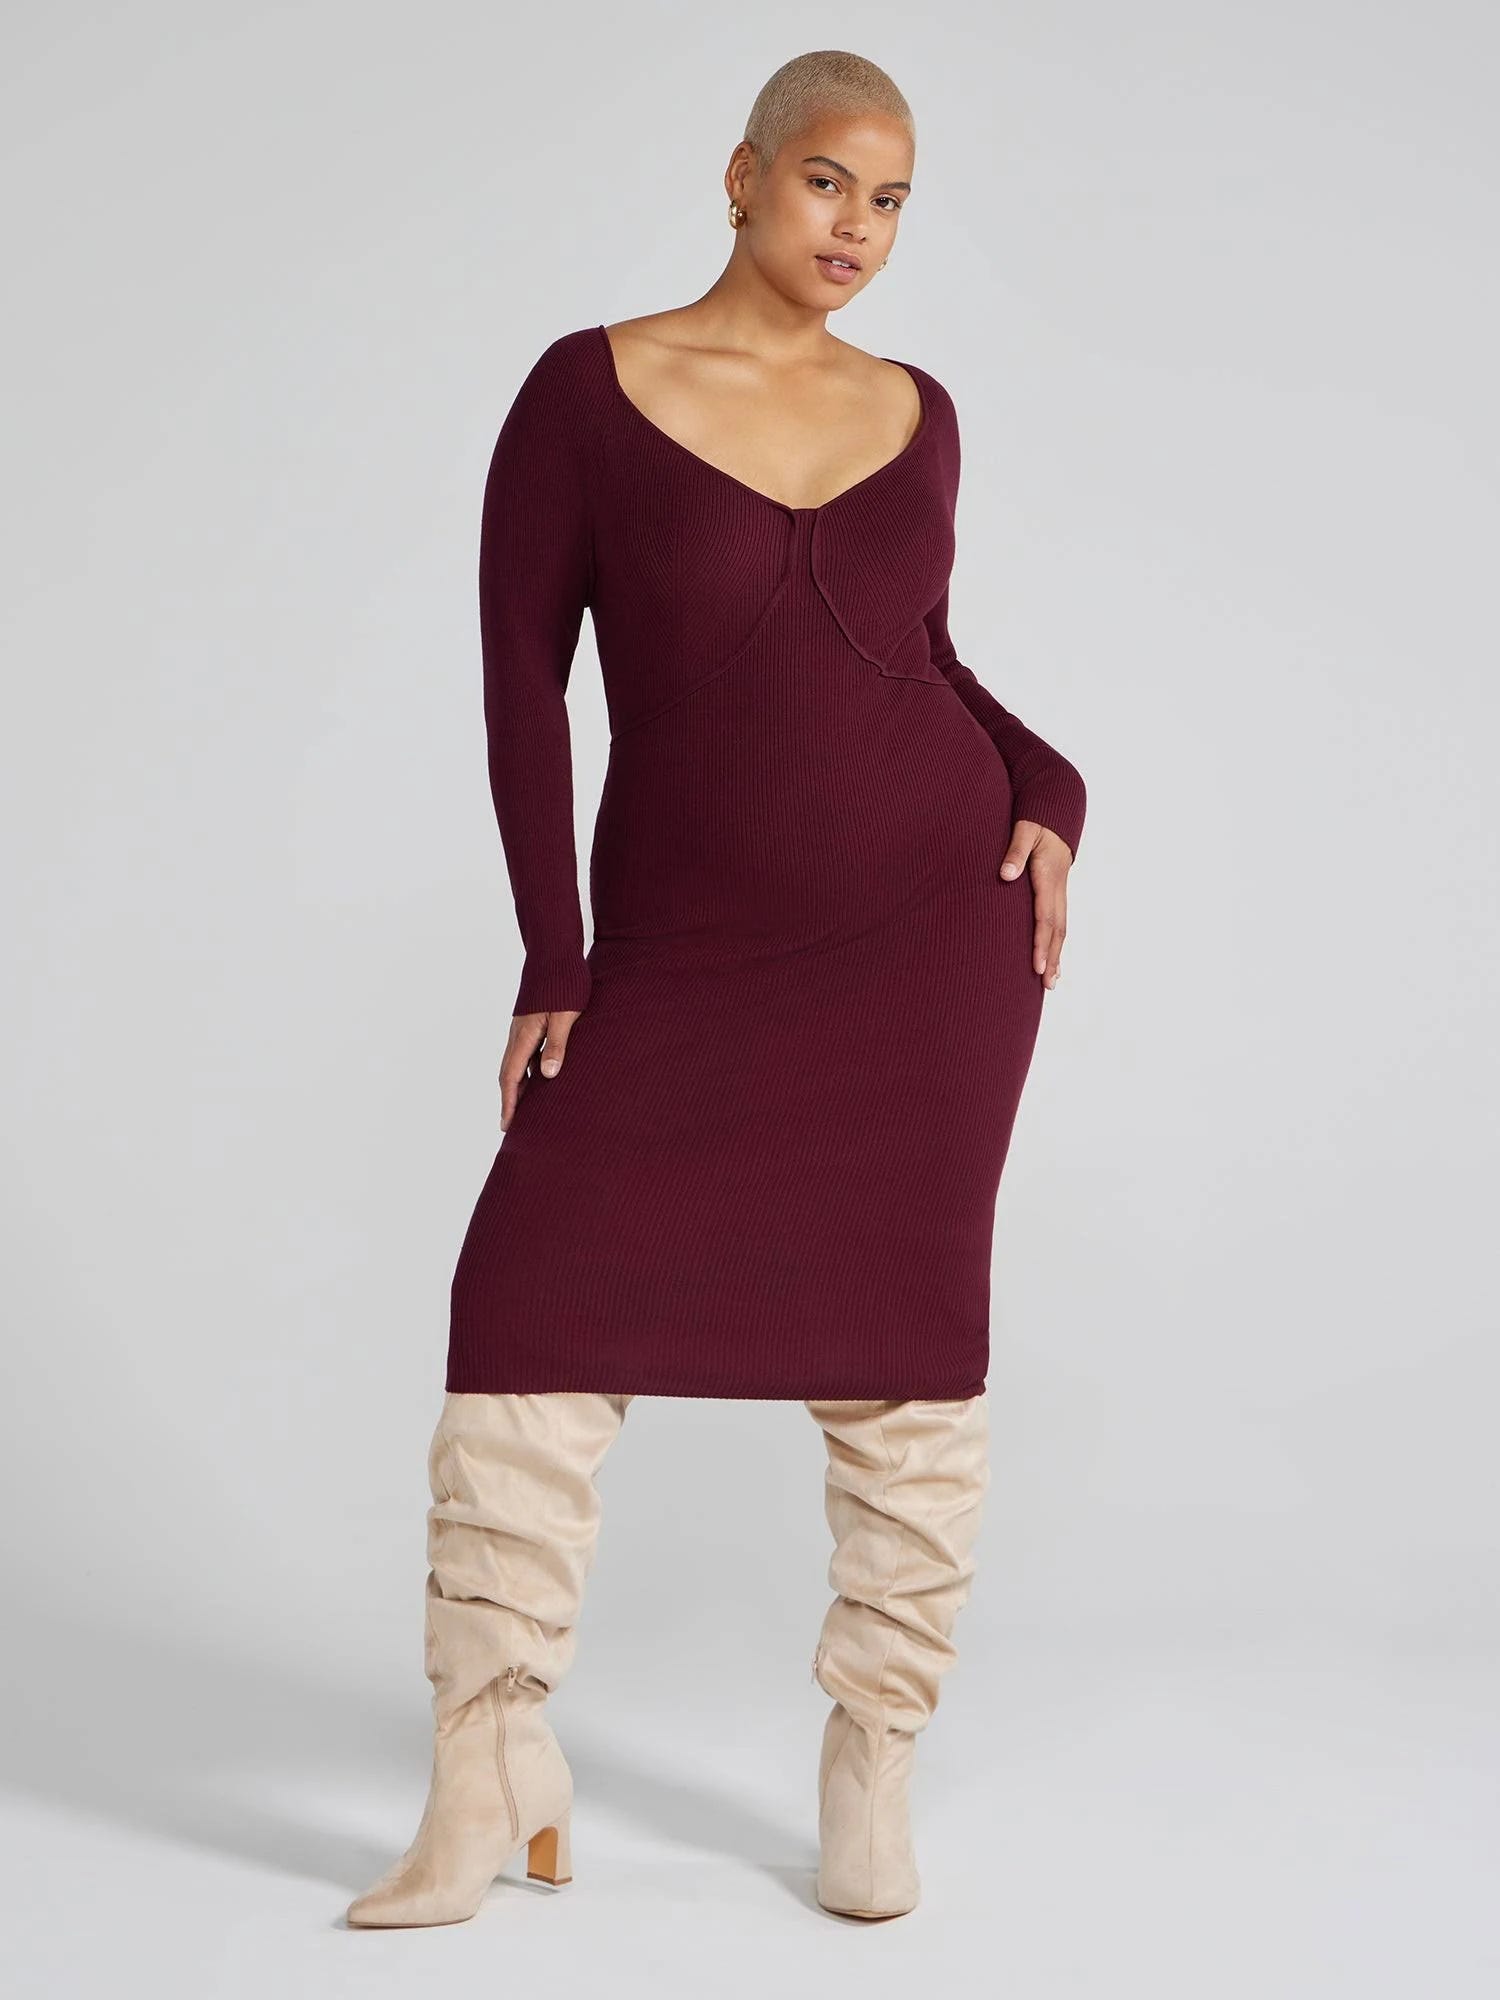 Slouchy Faux Suede Thigh-High Boots for Curvy Women | Image